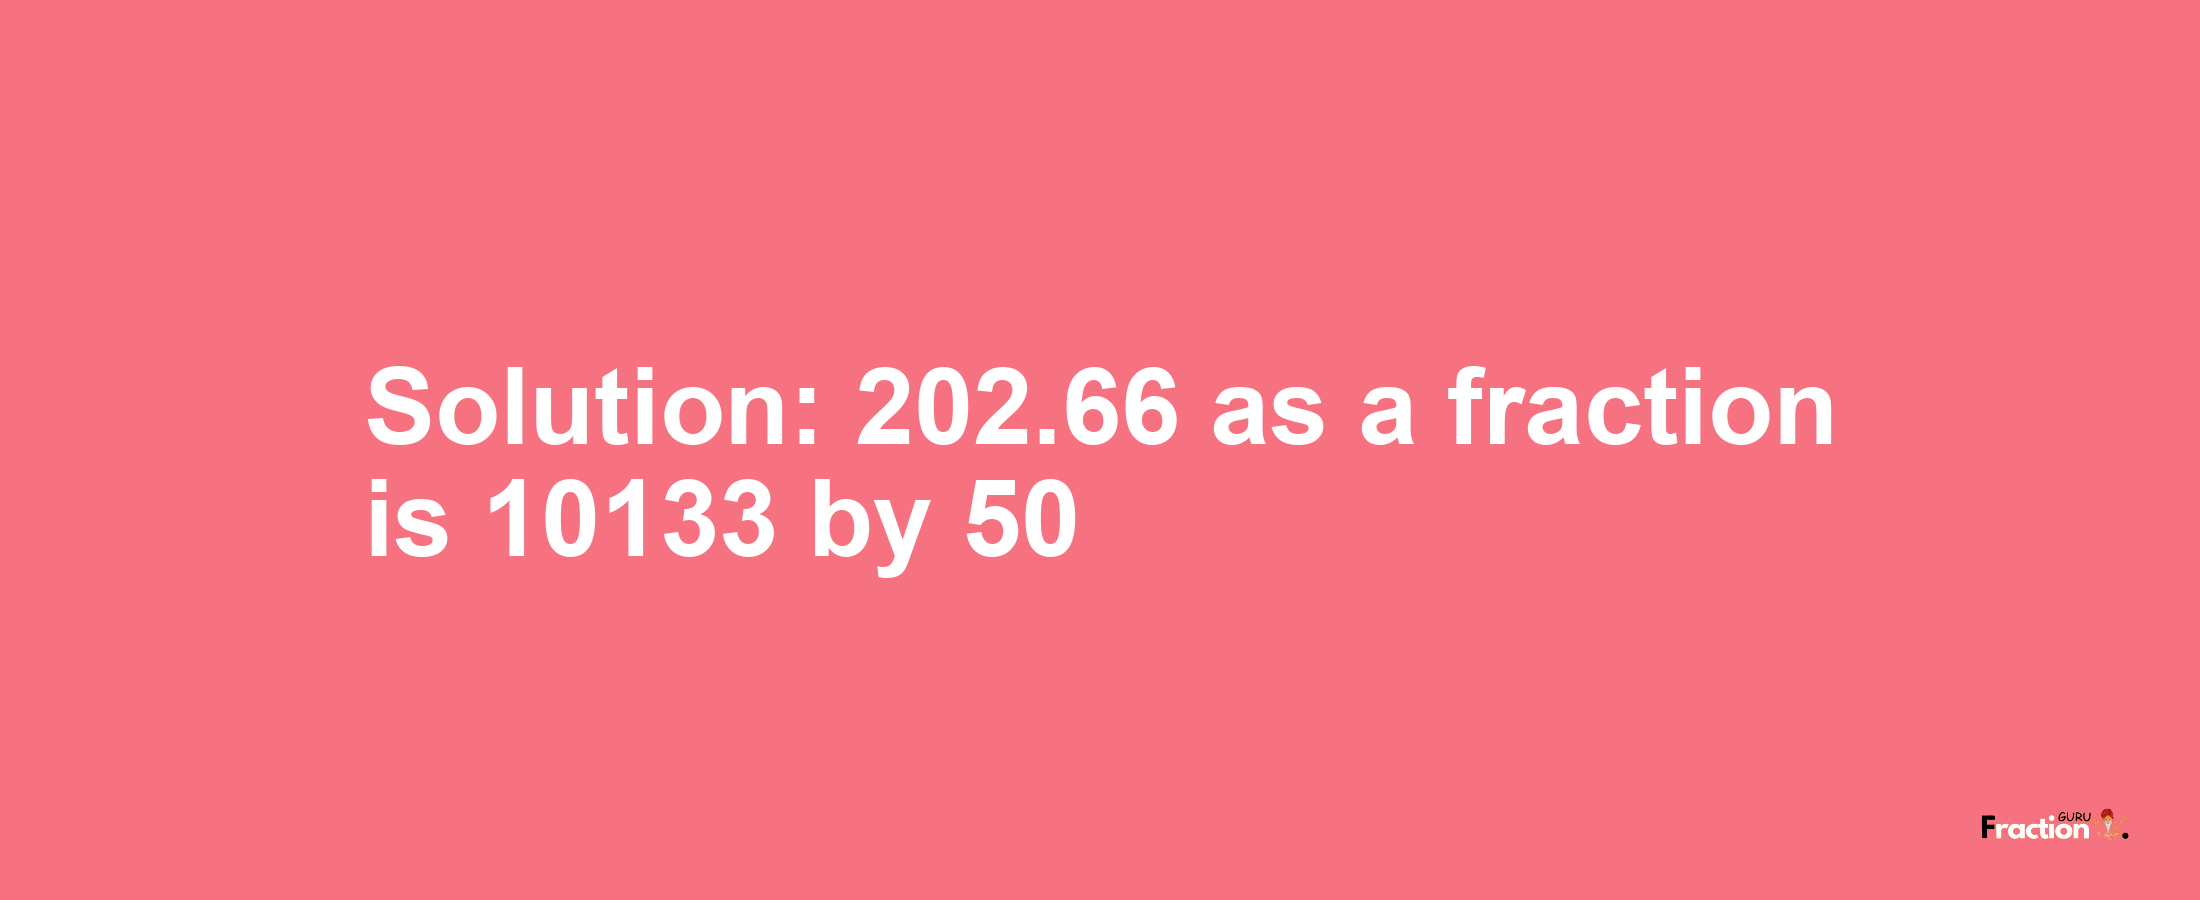 Solution:202.66 as a fraction is 10133/50